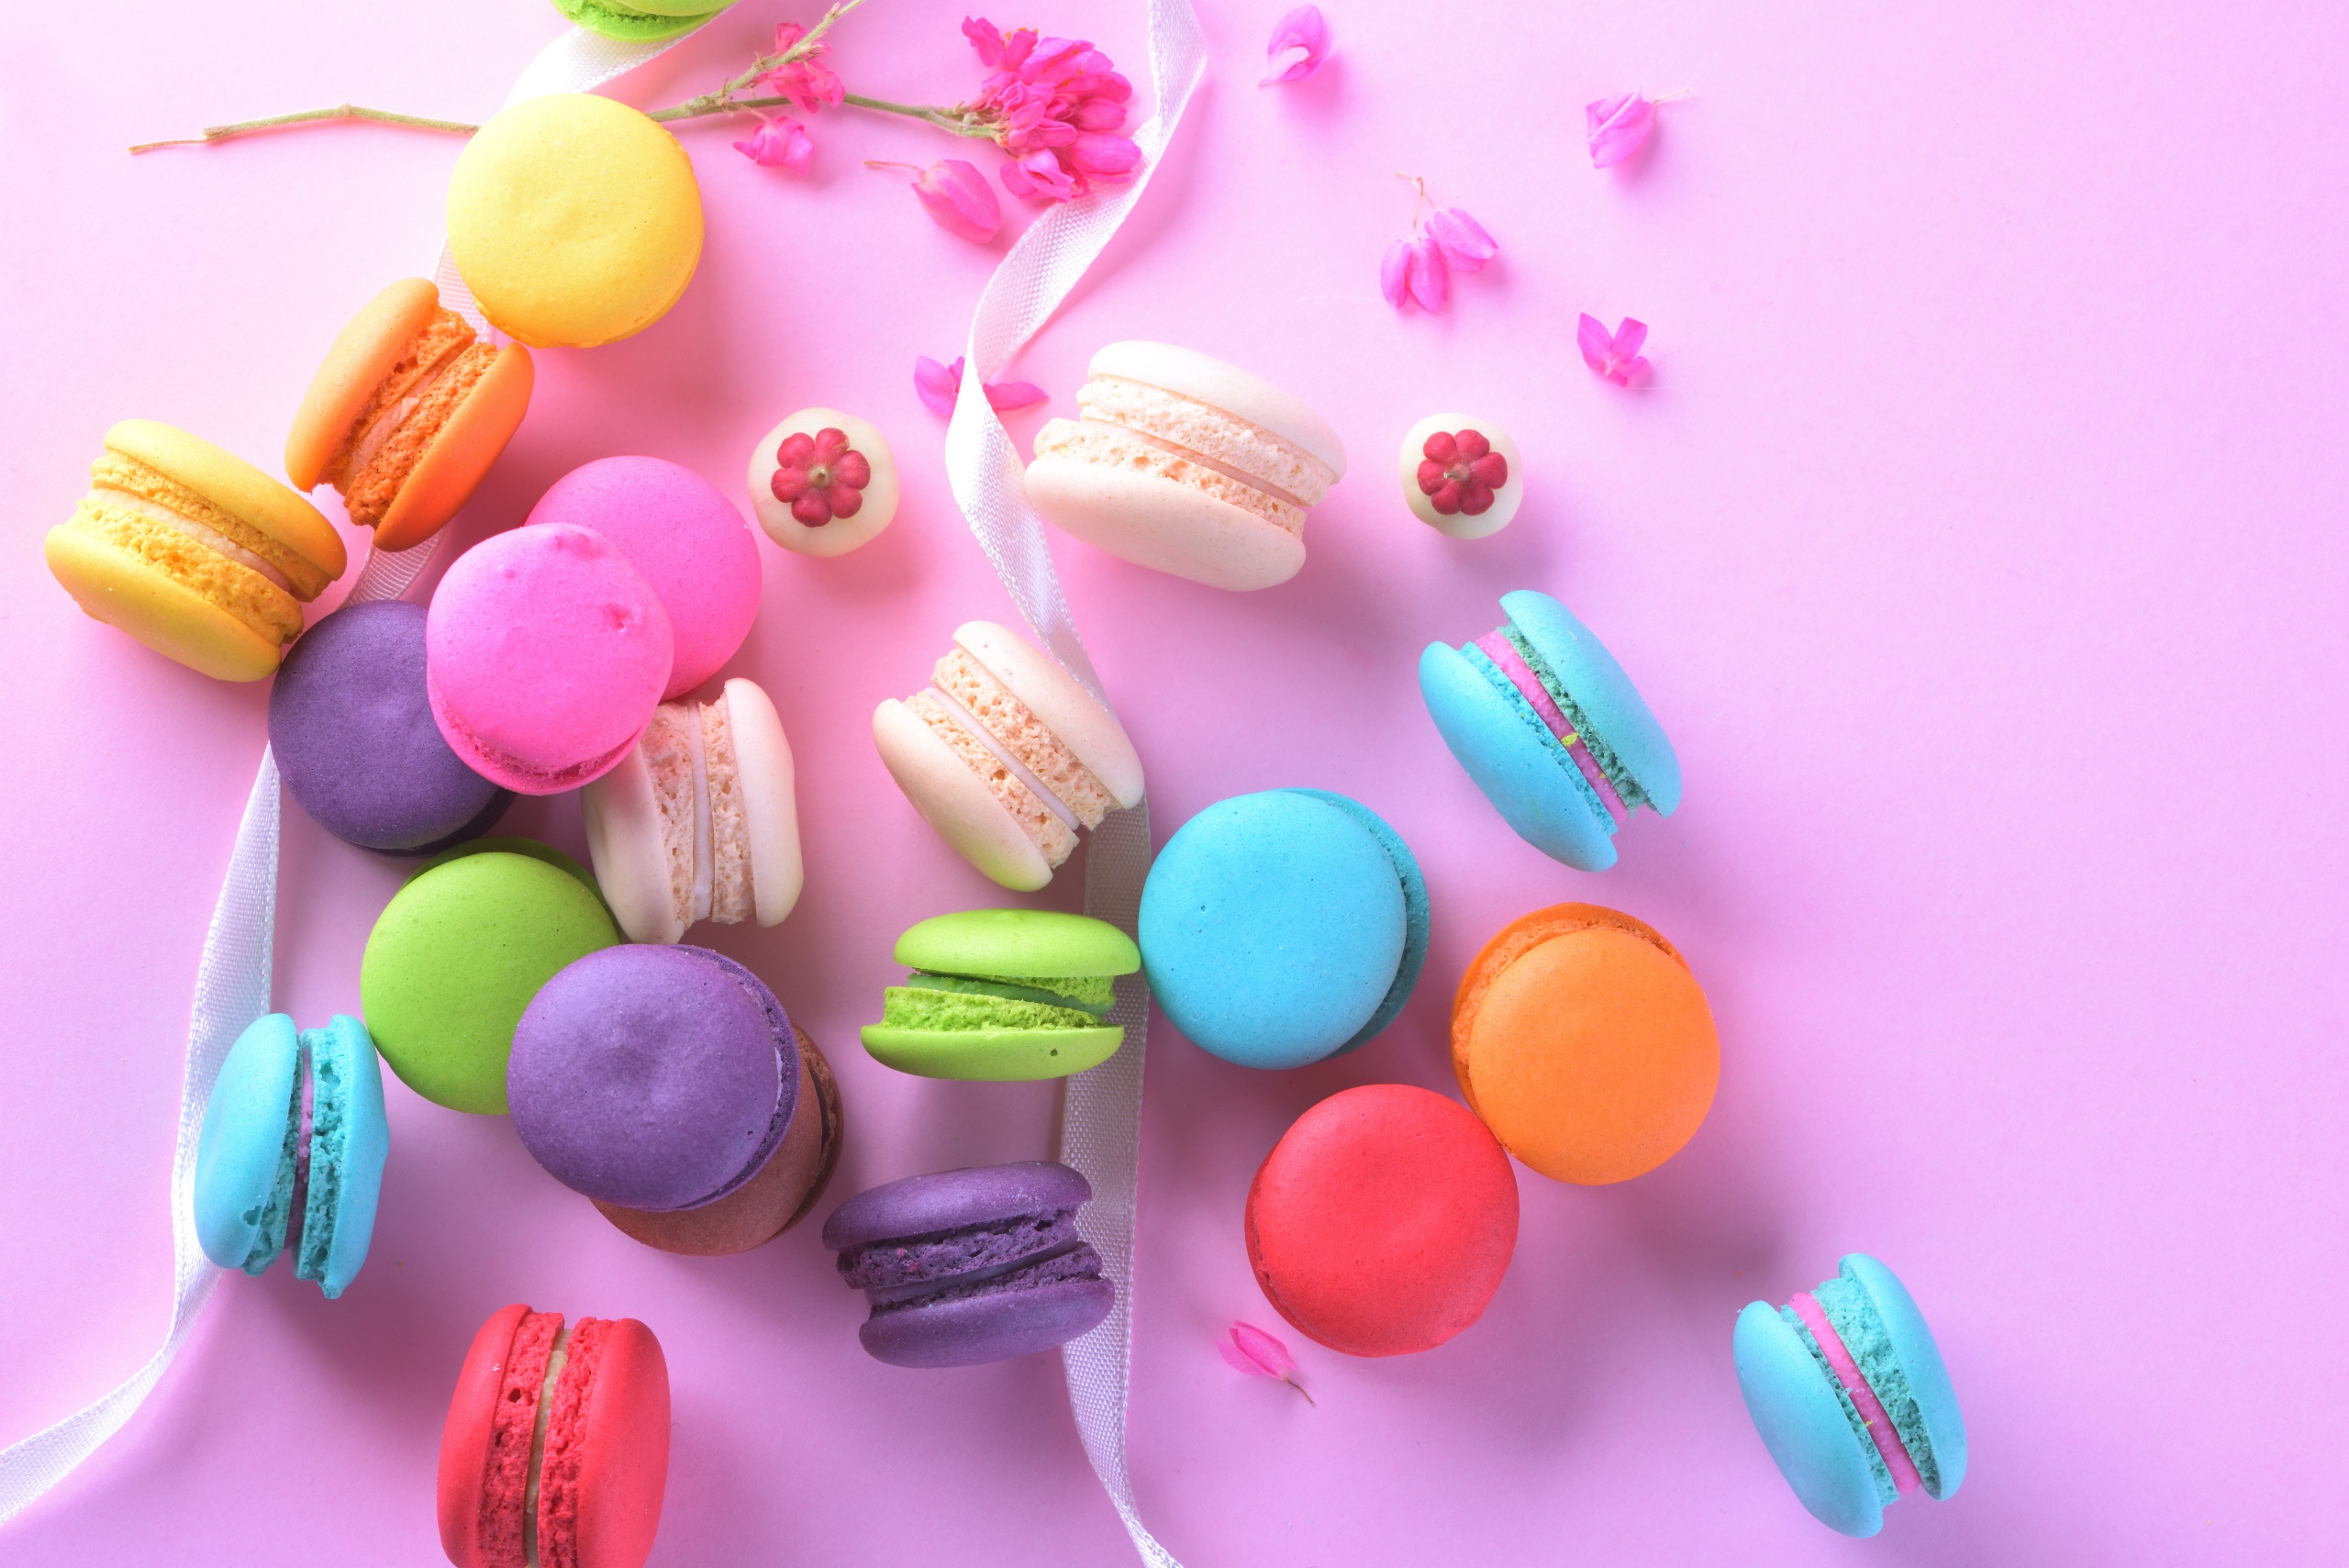 General 2560x1709 food sweets colorful macarons flowers petals ribbon cookies pink simple background